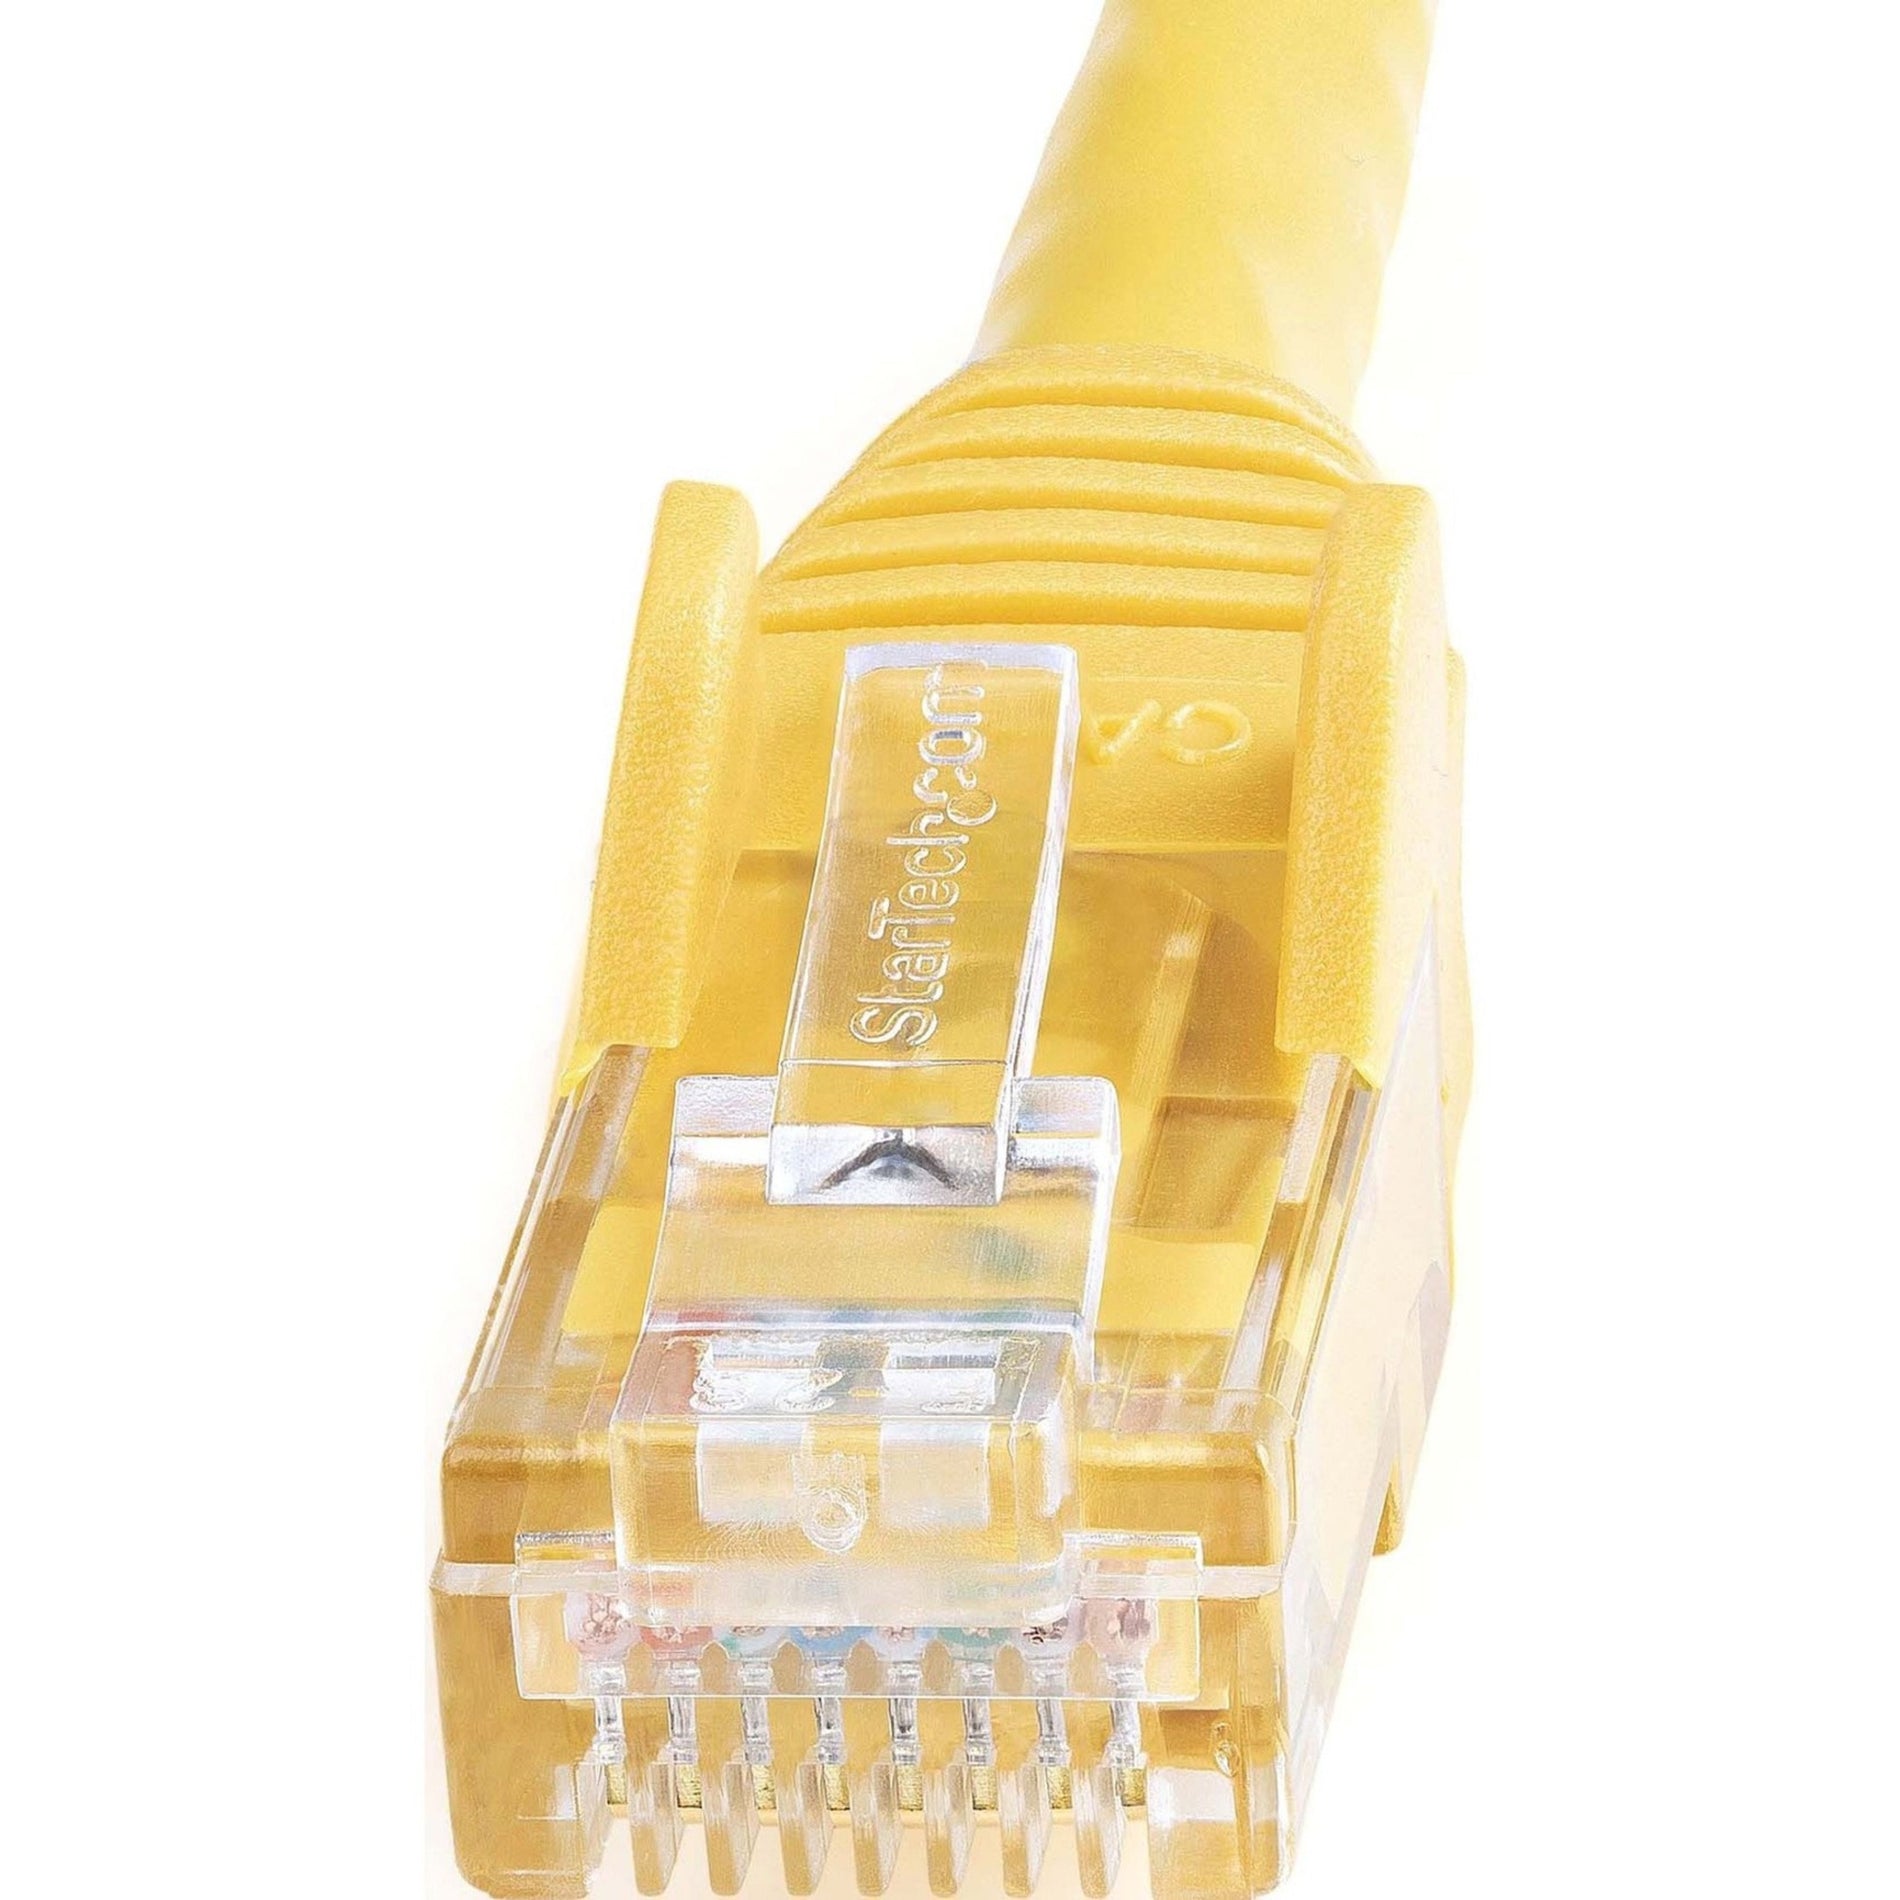 StarTech.com N6PATCH9YL Cat6 Patch Cable, 9 ft Yellow Ethernet Cable with Snagless RJ45 Connectors